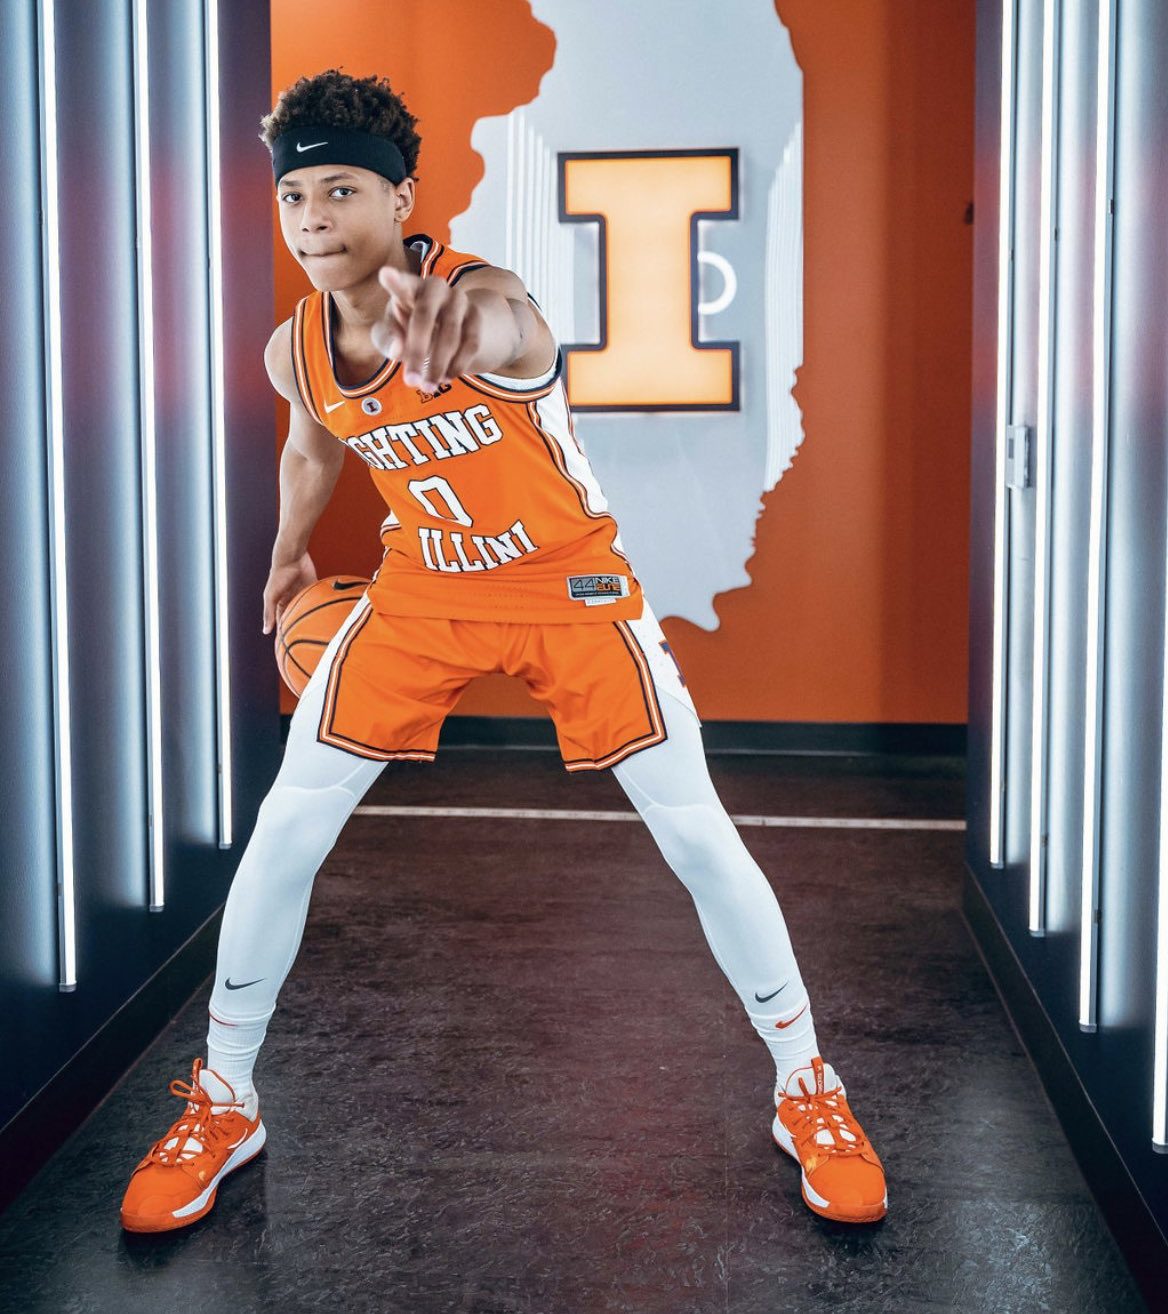 Illinois Coaches Set the Tone for his Visit According to Jeremiah Fears